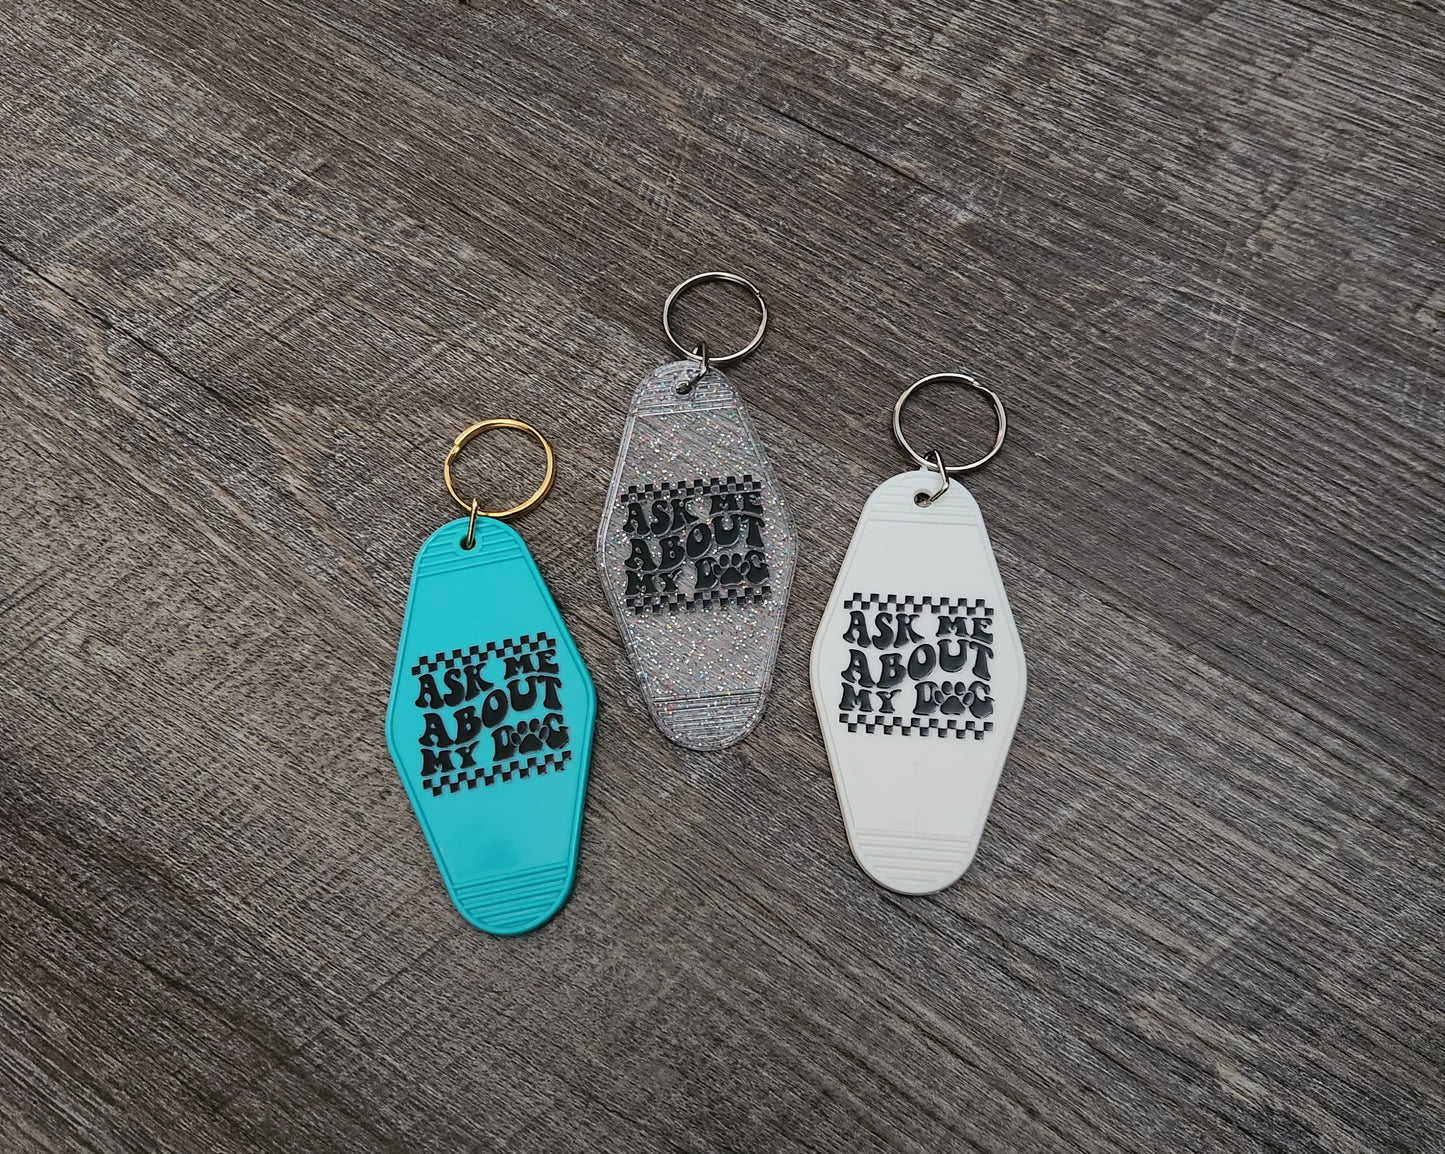 Ask Me About My Dog - Keychain